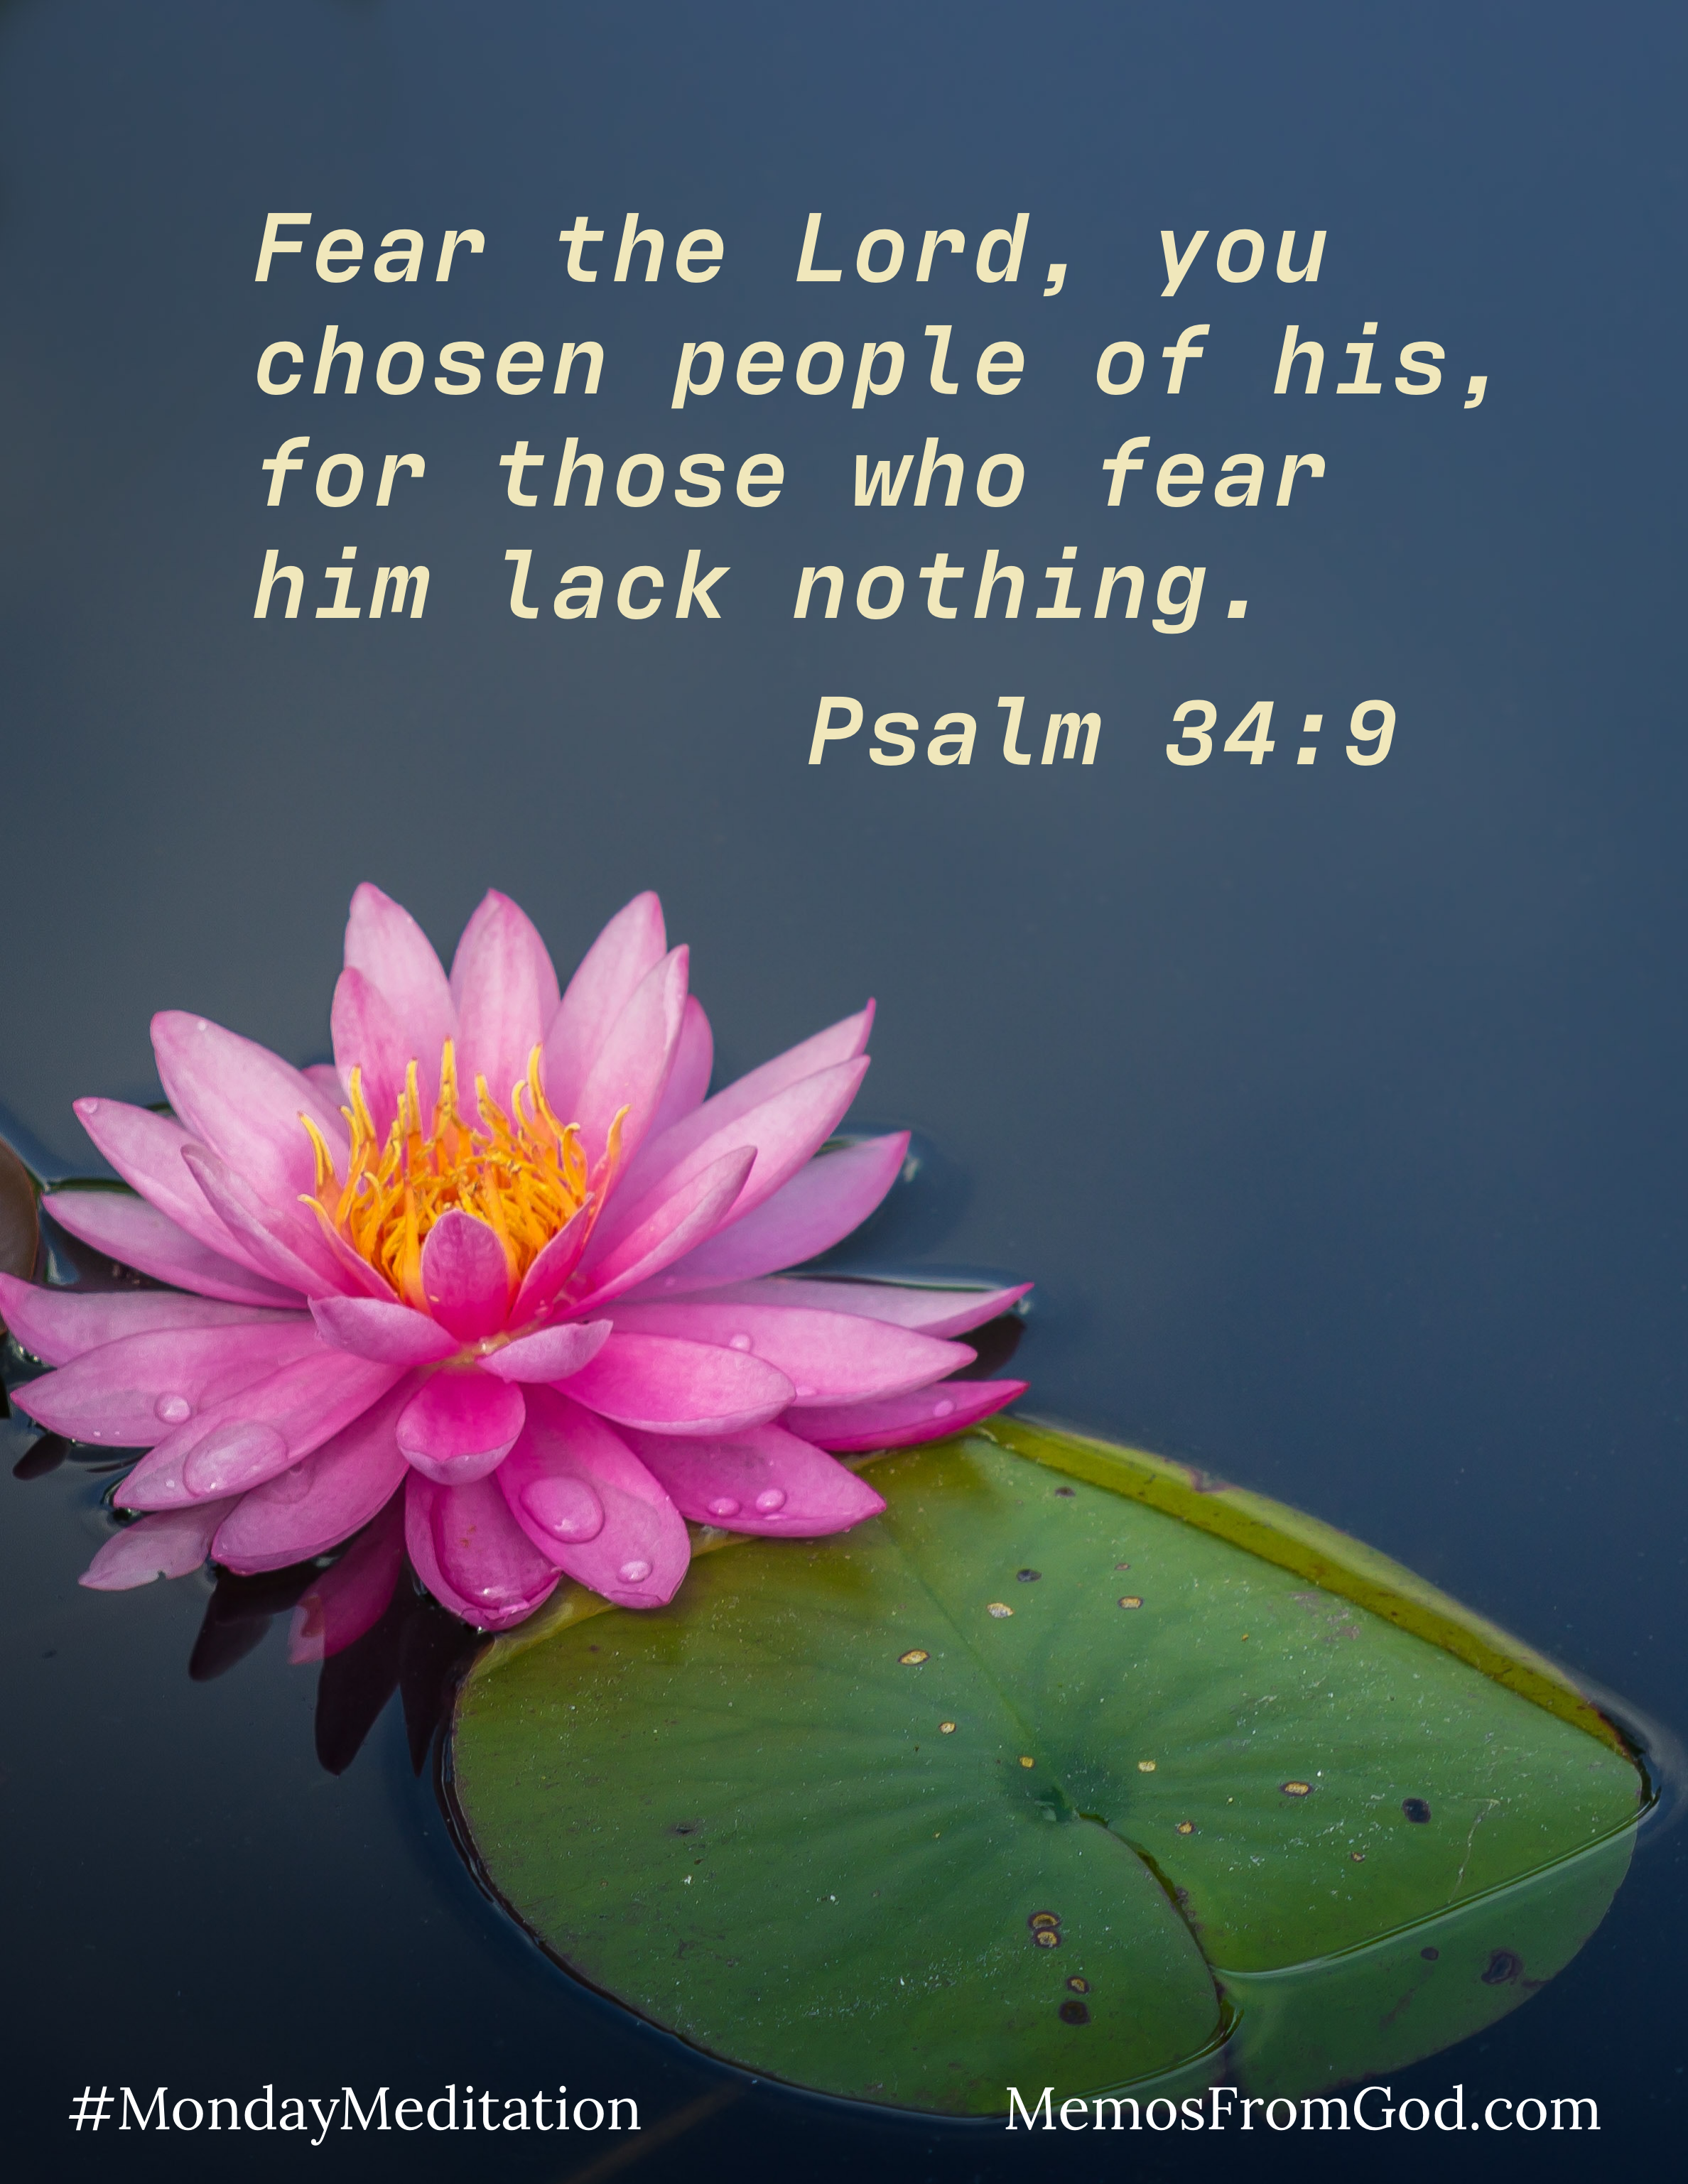 A deep pink water lily with a single large green leaf in a dark blue pond. Caption: Fear the Lord, you chosen people of his, for those who fear him lack nothing. Psalm 34:9